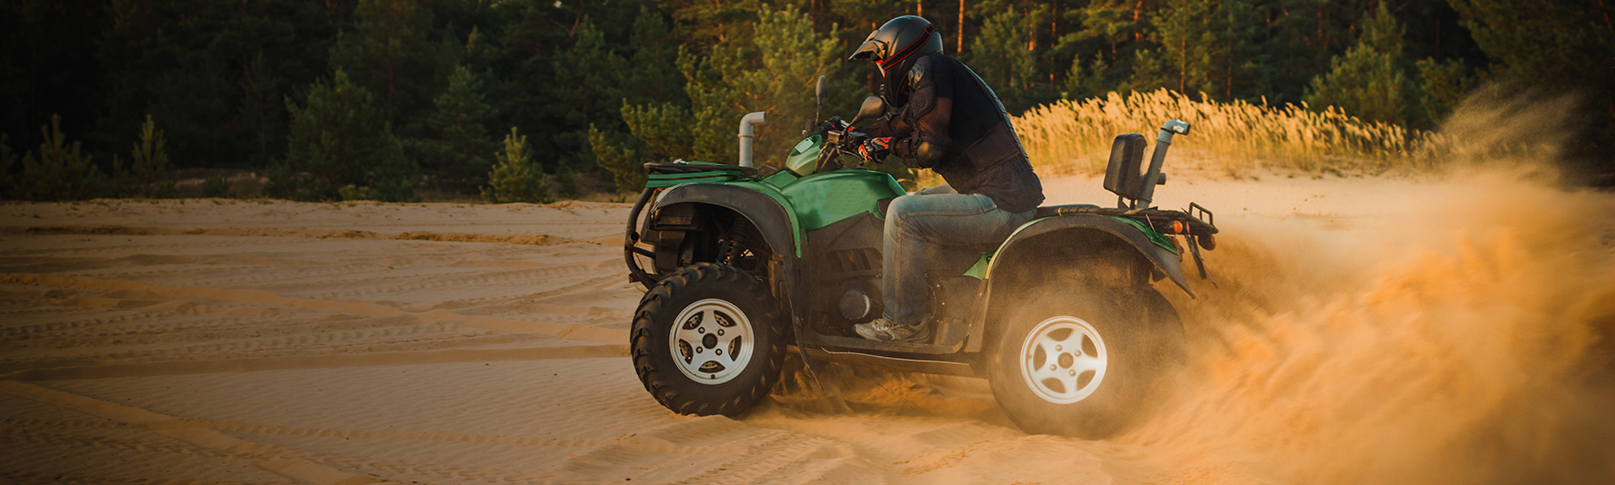 Man riding four wheeler in the sand